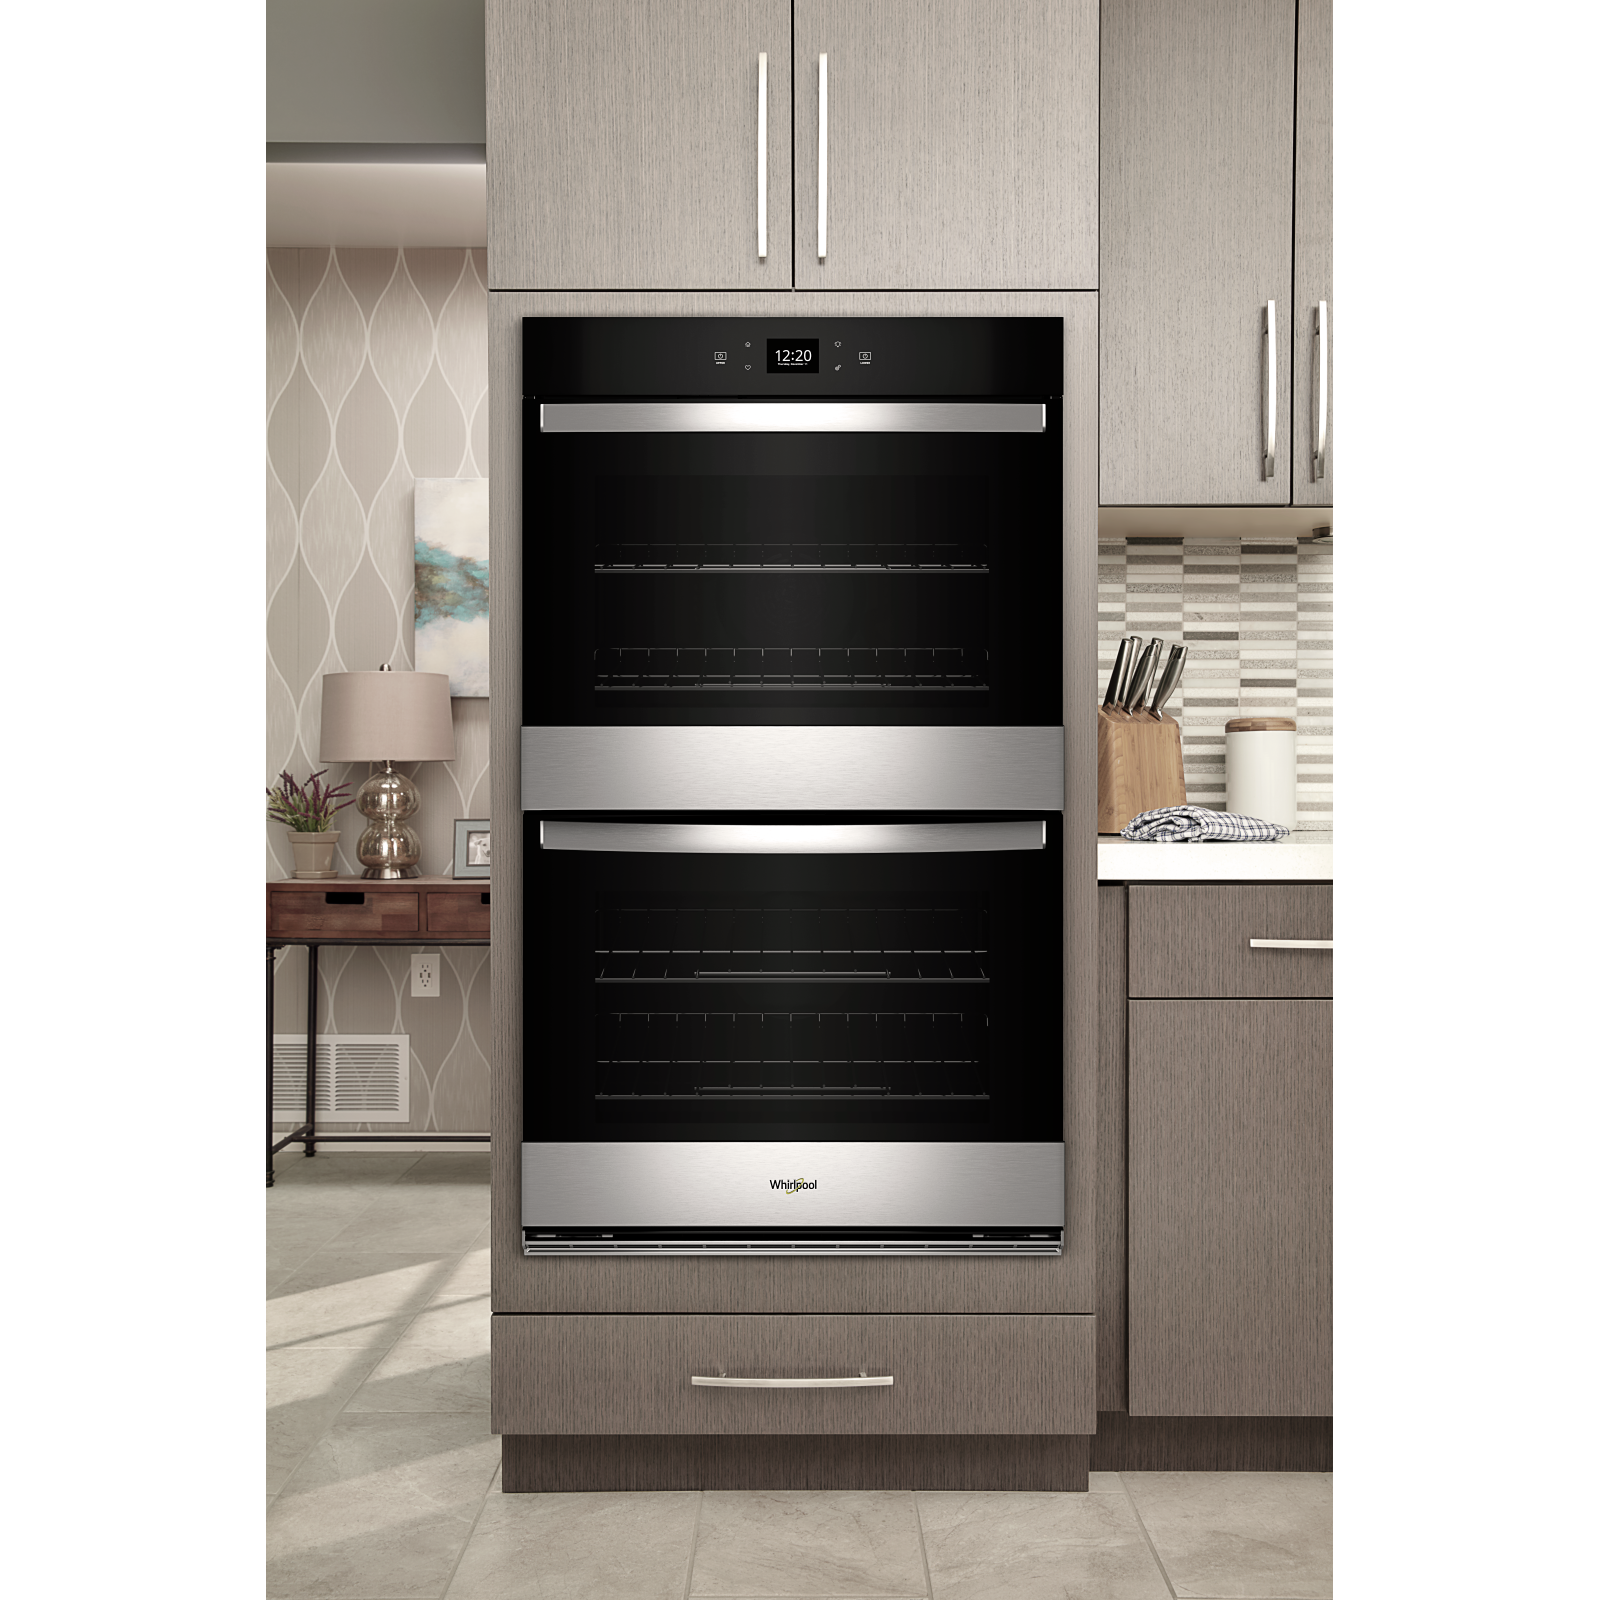 Whirlpool - 8.6 cu. ft Double Wall Oven in Stainless - WOED5027LZ